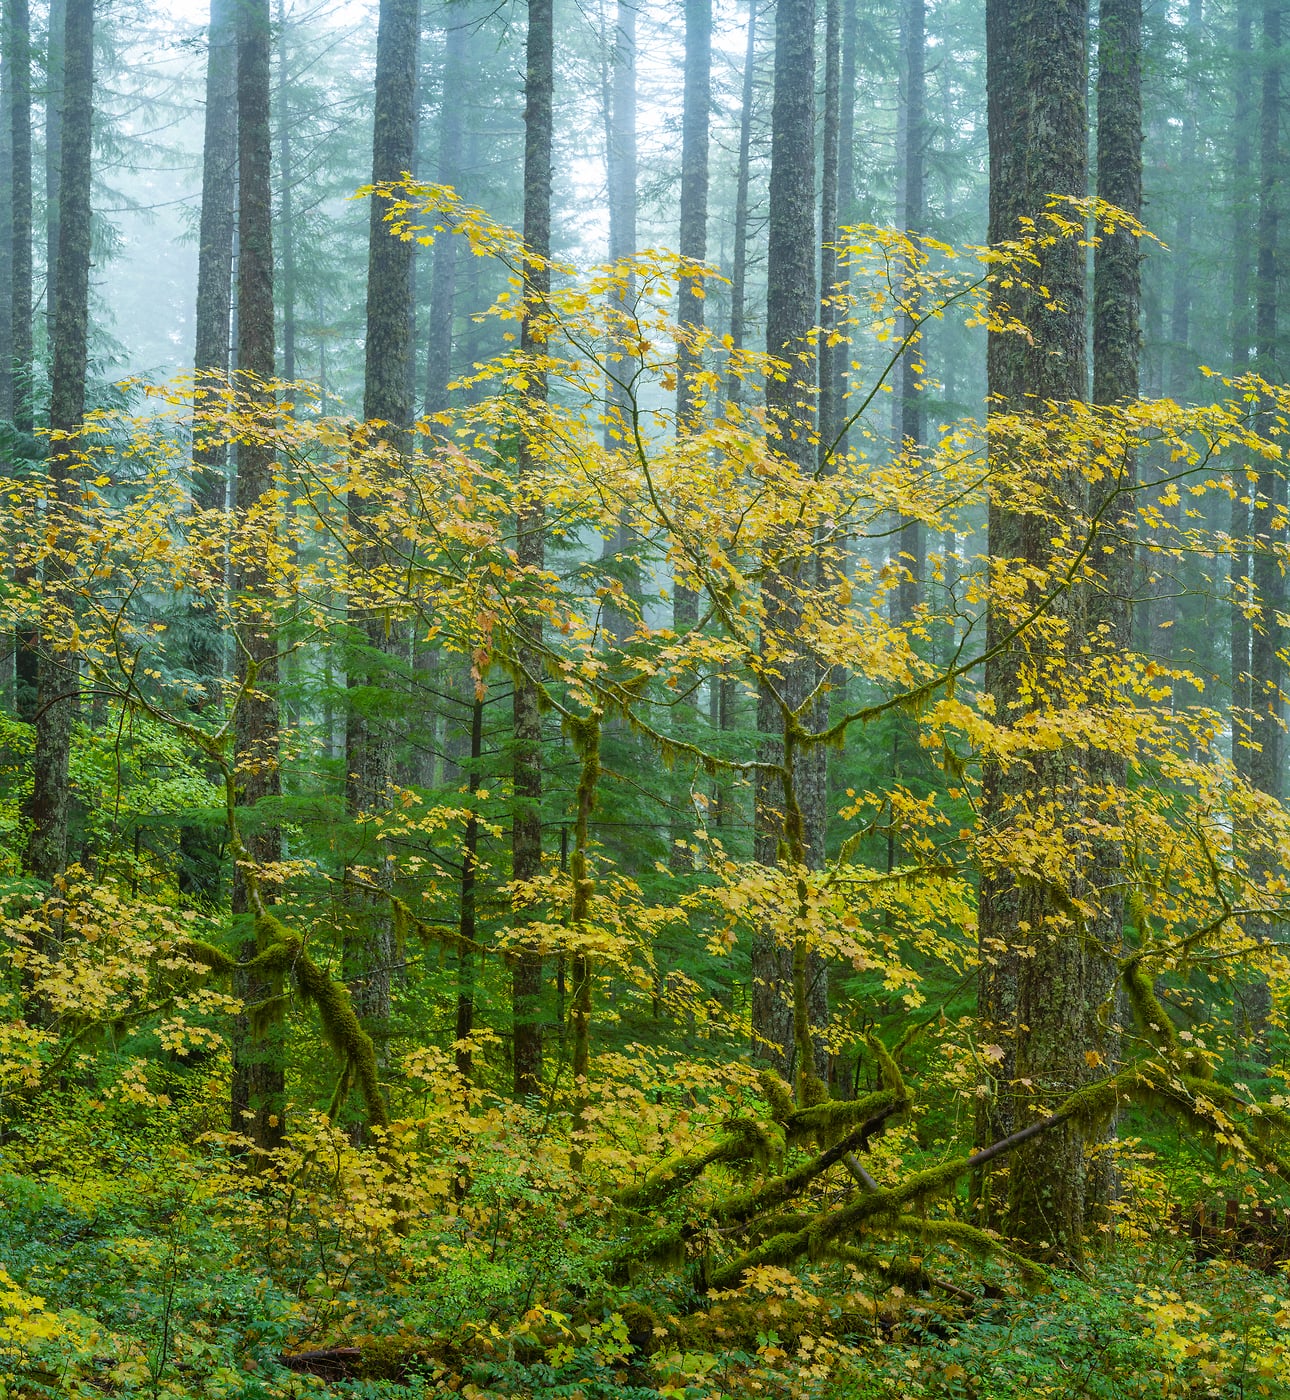 176 megapixels! A very high resolution, large-format VAST photo print of maple trees and fir trees in a forest; nature photograph created by Greg Probst in Gifford Pinchot National Forest, Washington.